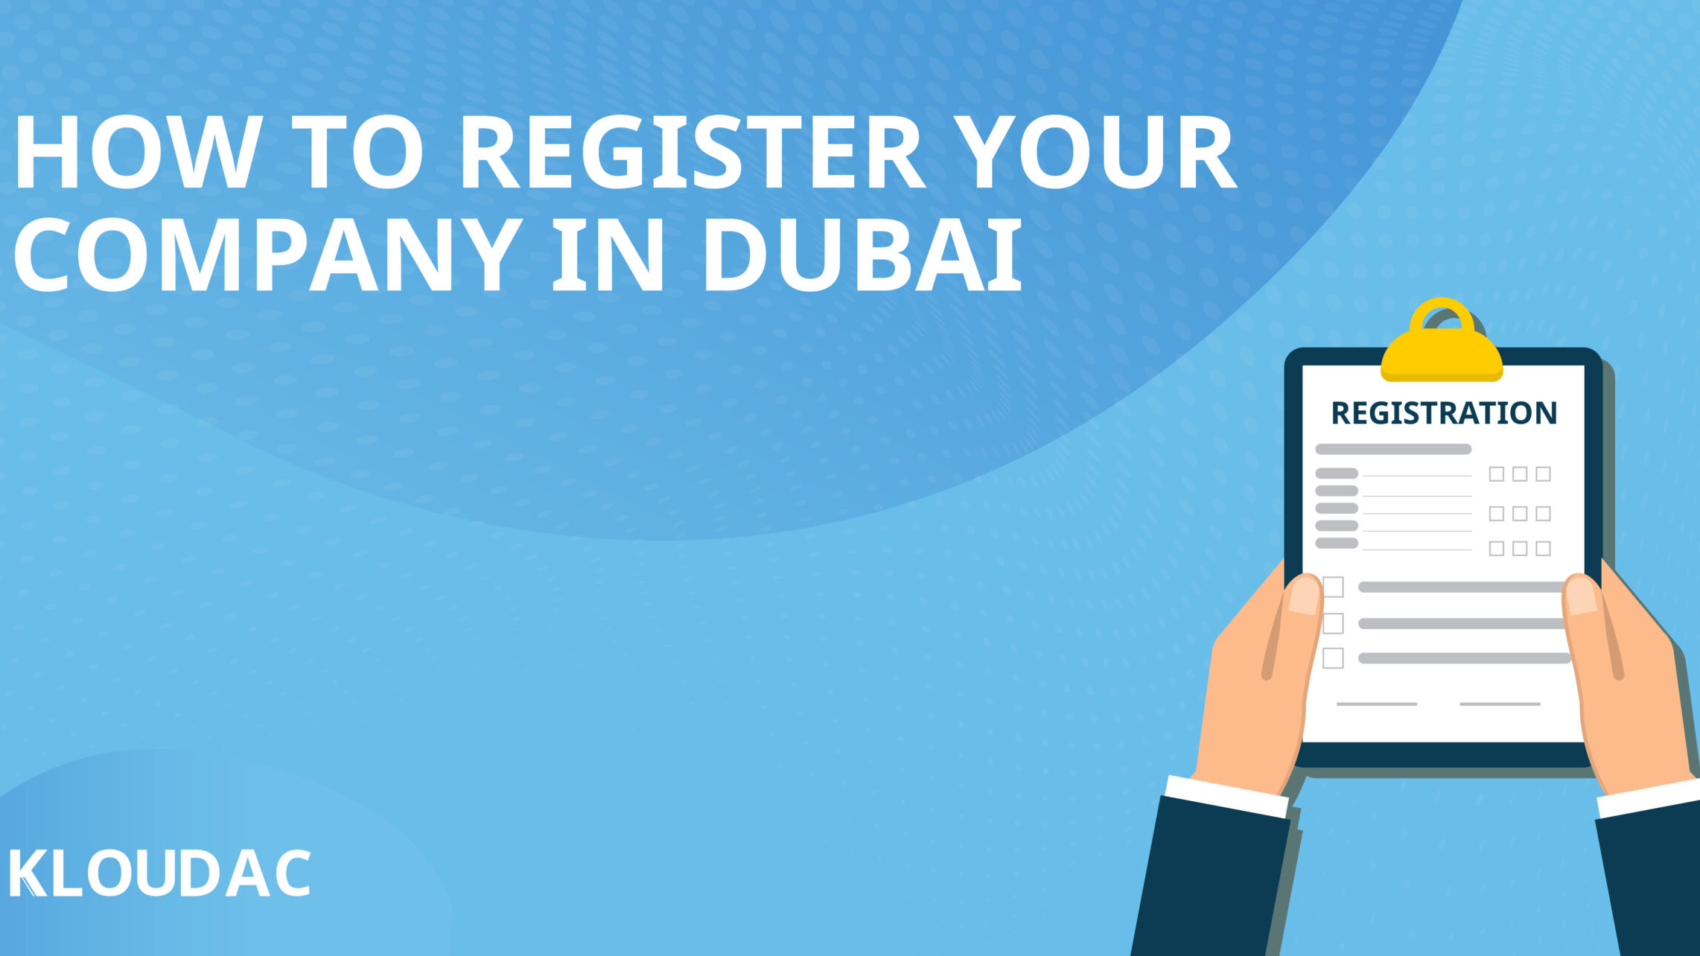 How to register your company in Dubai